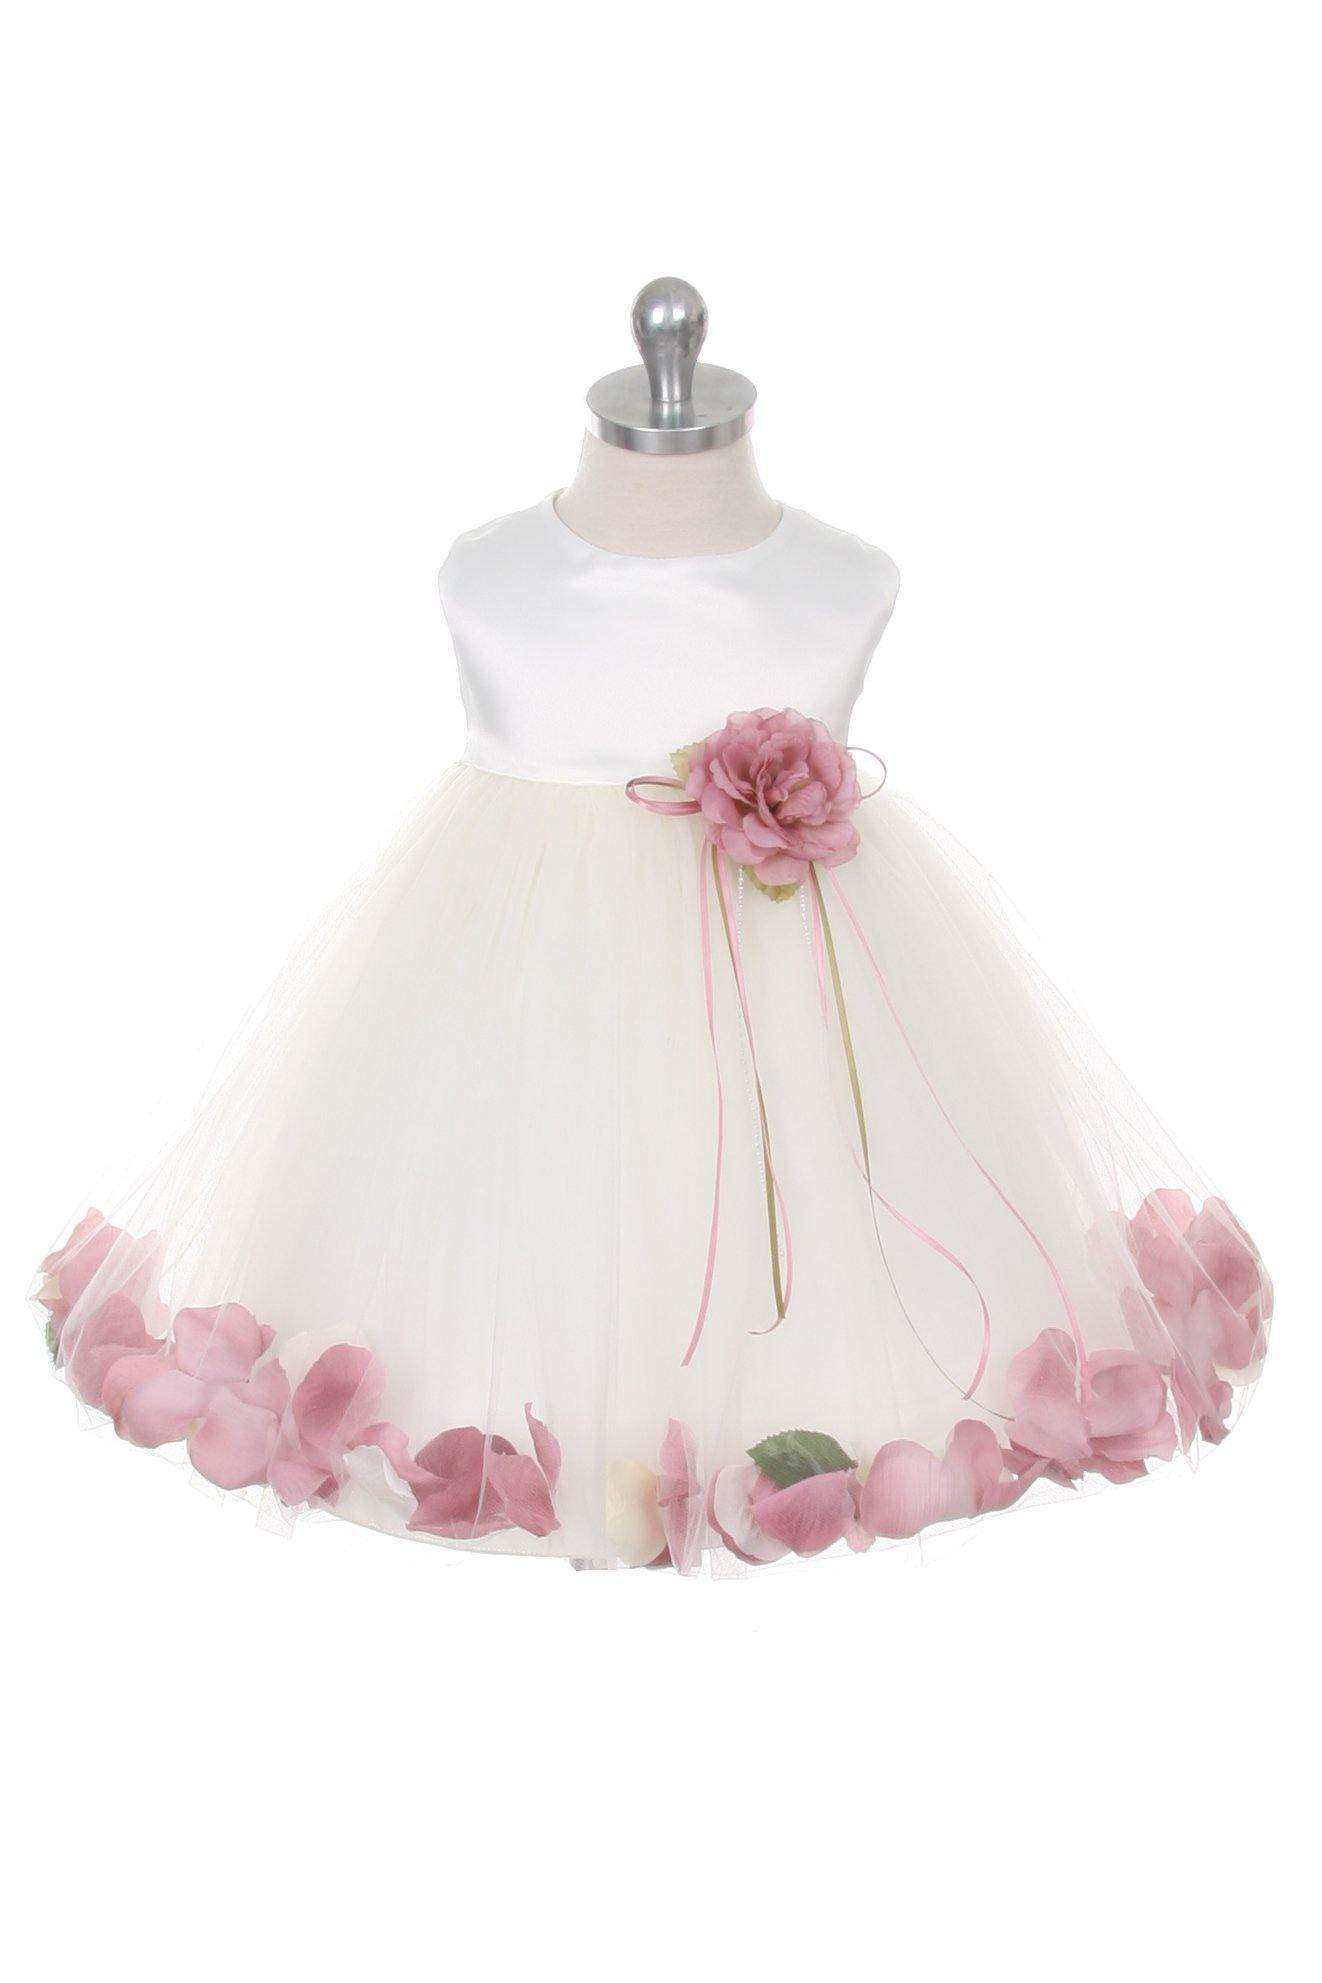 Satin Flower Petal Baby Dress (White Dress)-Kid's Dream-baby-dress,baby_girl,color_Dusty Rose,color_White,fabric_Satin,fabric_Tulle,meta-related-collection-shop-the-outfit-baby,size_L-18 Months,size_M-12 Months,size_S-6 Months,size_XL-24 Months